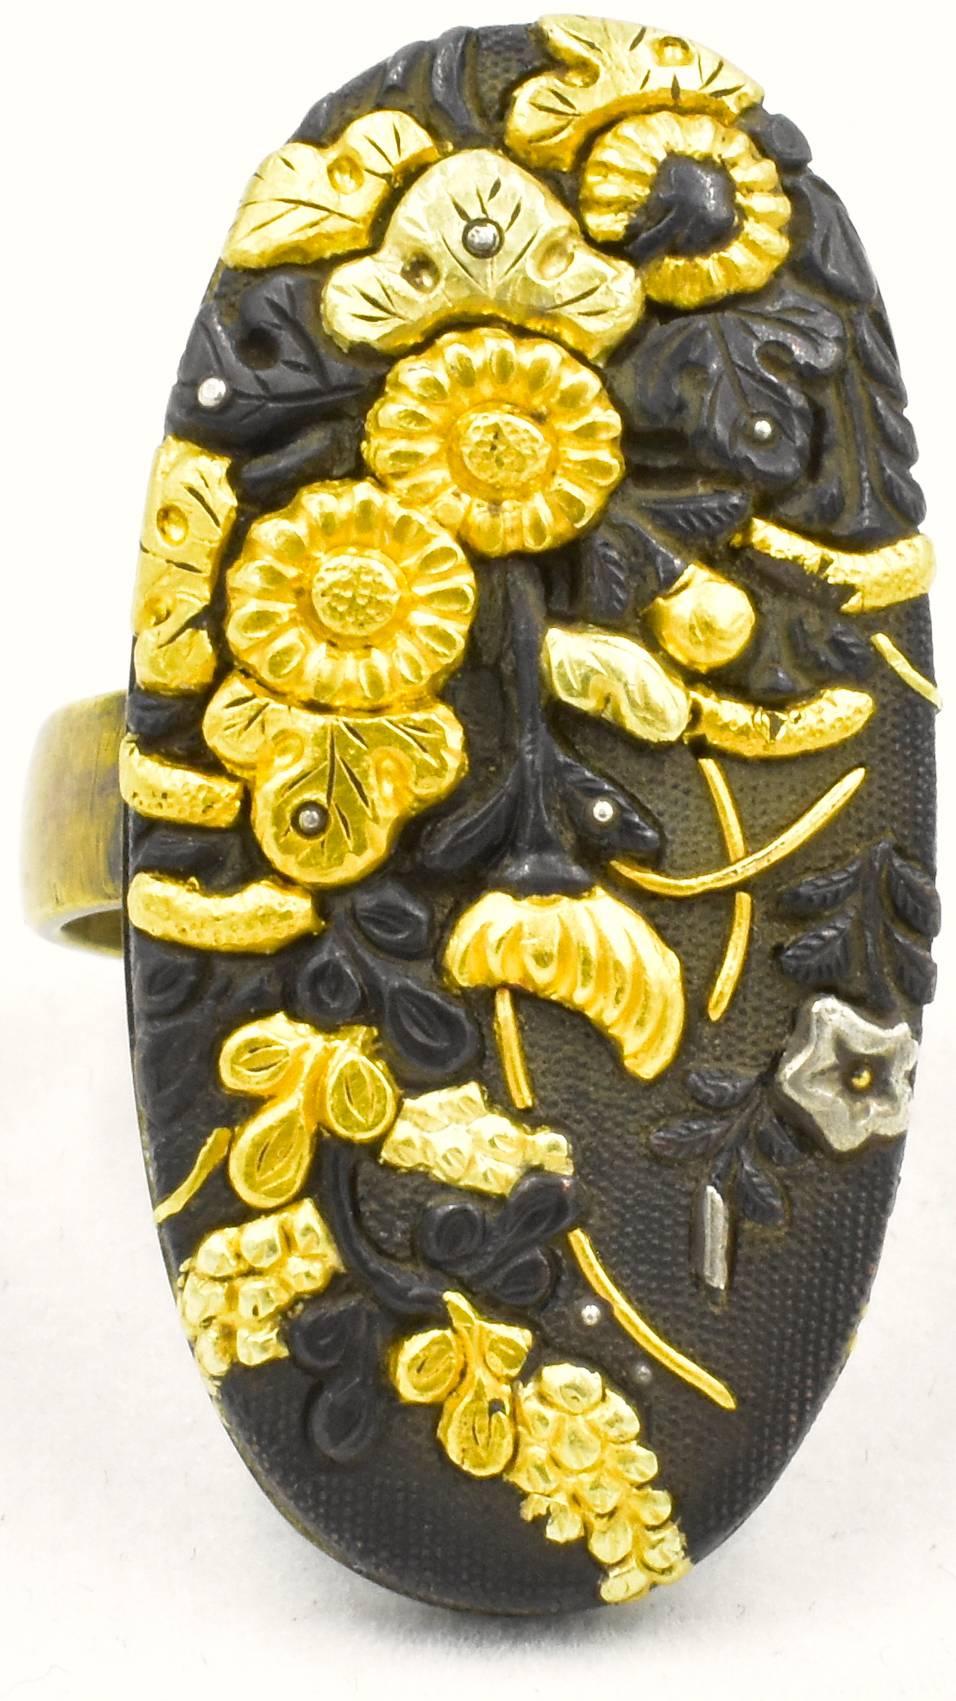 Marvelous shakudo ring decorated with a bold floral motif in gold and silver was made in Japan in the 1890's. Shakudo was made in Japan during the Samurai period by artisans who made ornaments to adorn swords and other weapons. It became popular to